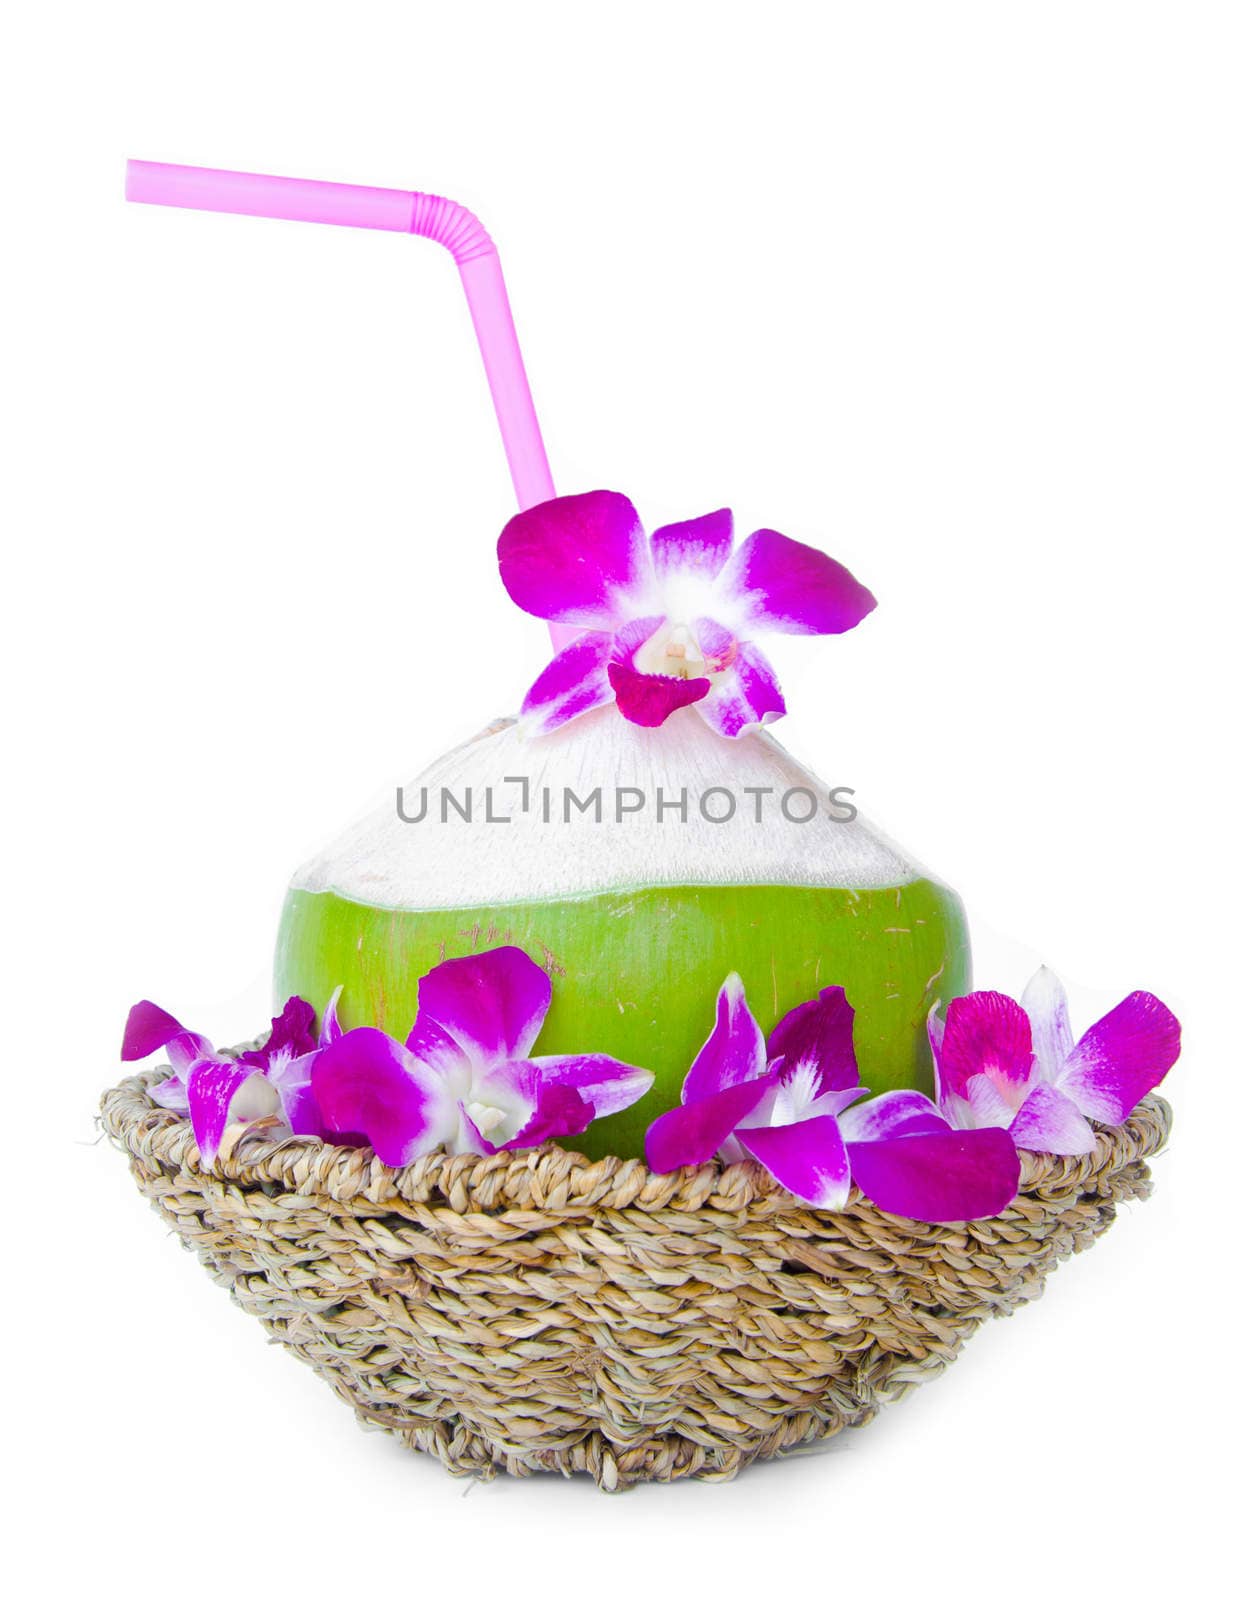 Green coconuts with drinking straw in weave basket isolated on white background.